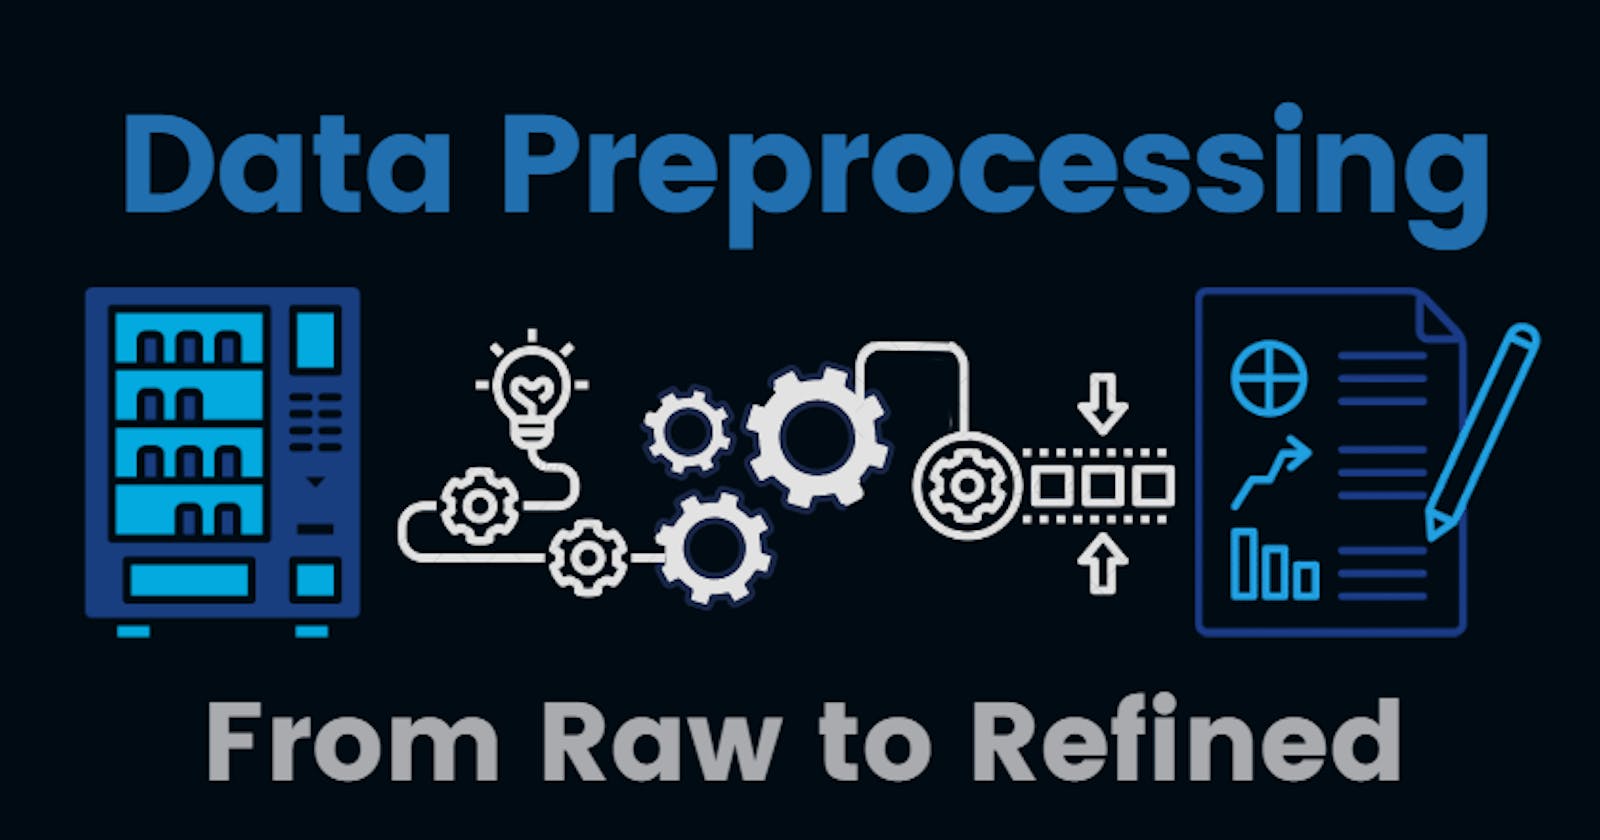 Data Preprocessing: From Raw to Refined